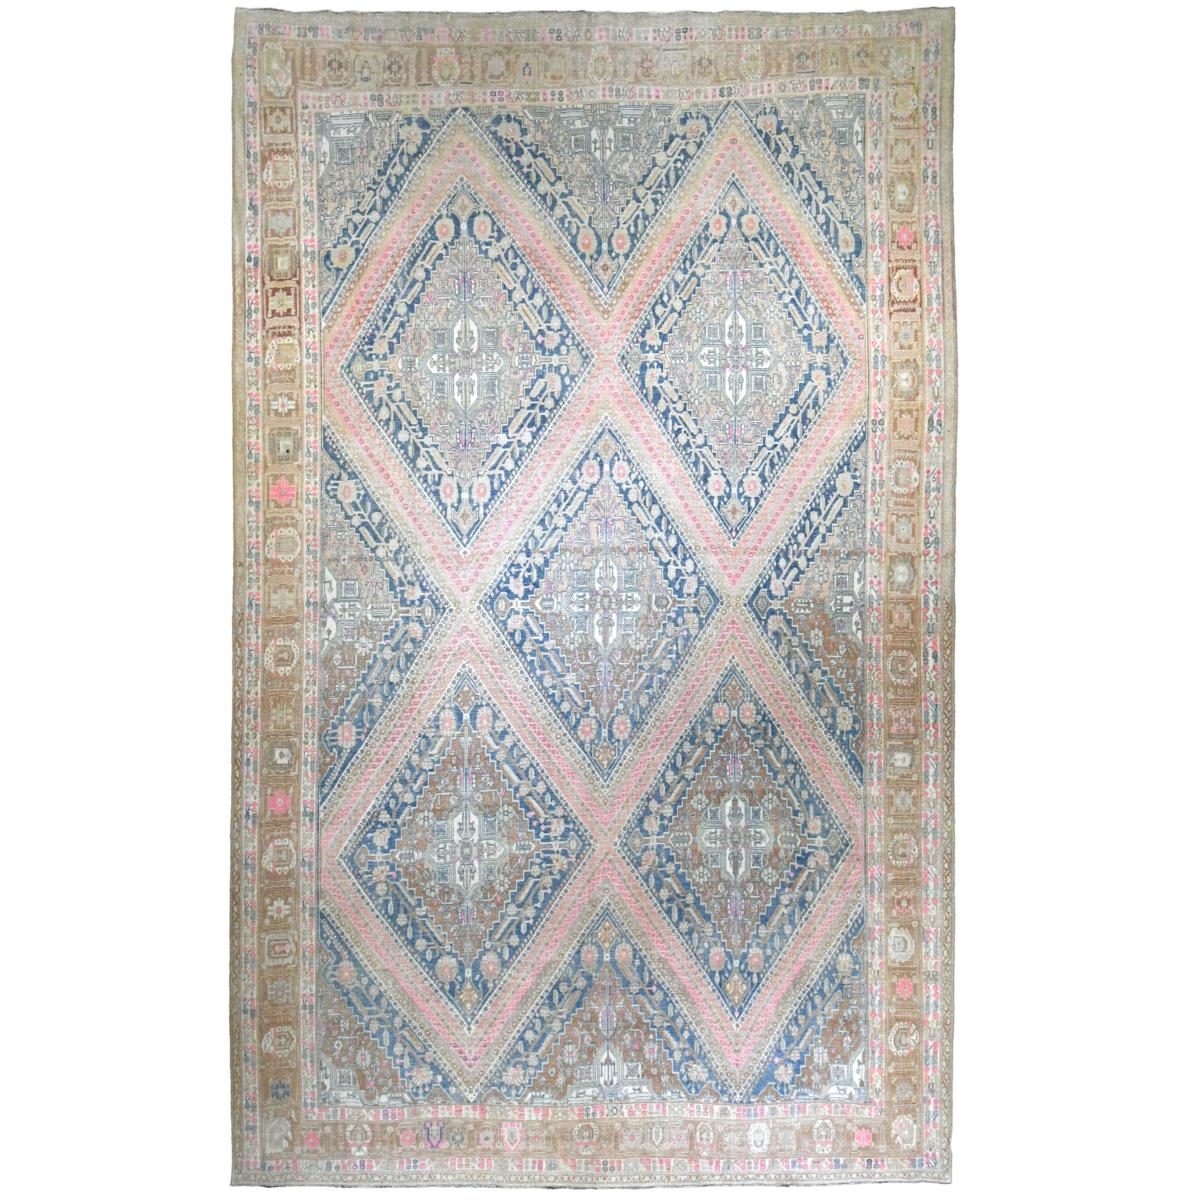 Circa: 1920’s

Dimensions: 11’x 17’

Material: 100% Wool Pile, Hand Knotted

Design: Persian, Joshagan Design

17836

Persian rugs and carpets of various types were woven in parallel by nomadic tribes in village and town workshops, and by royal